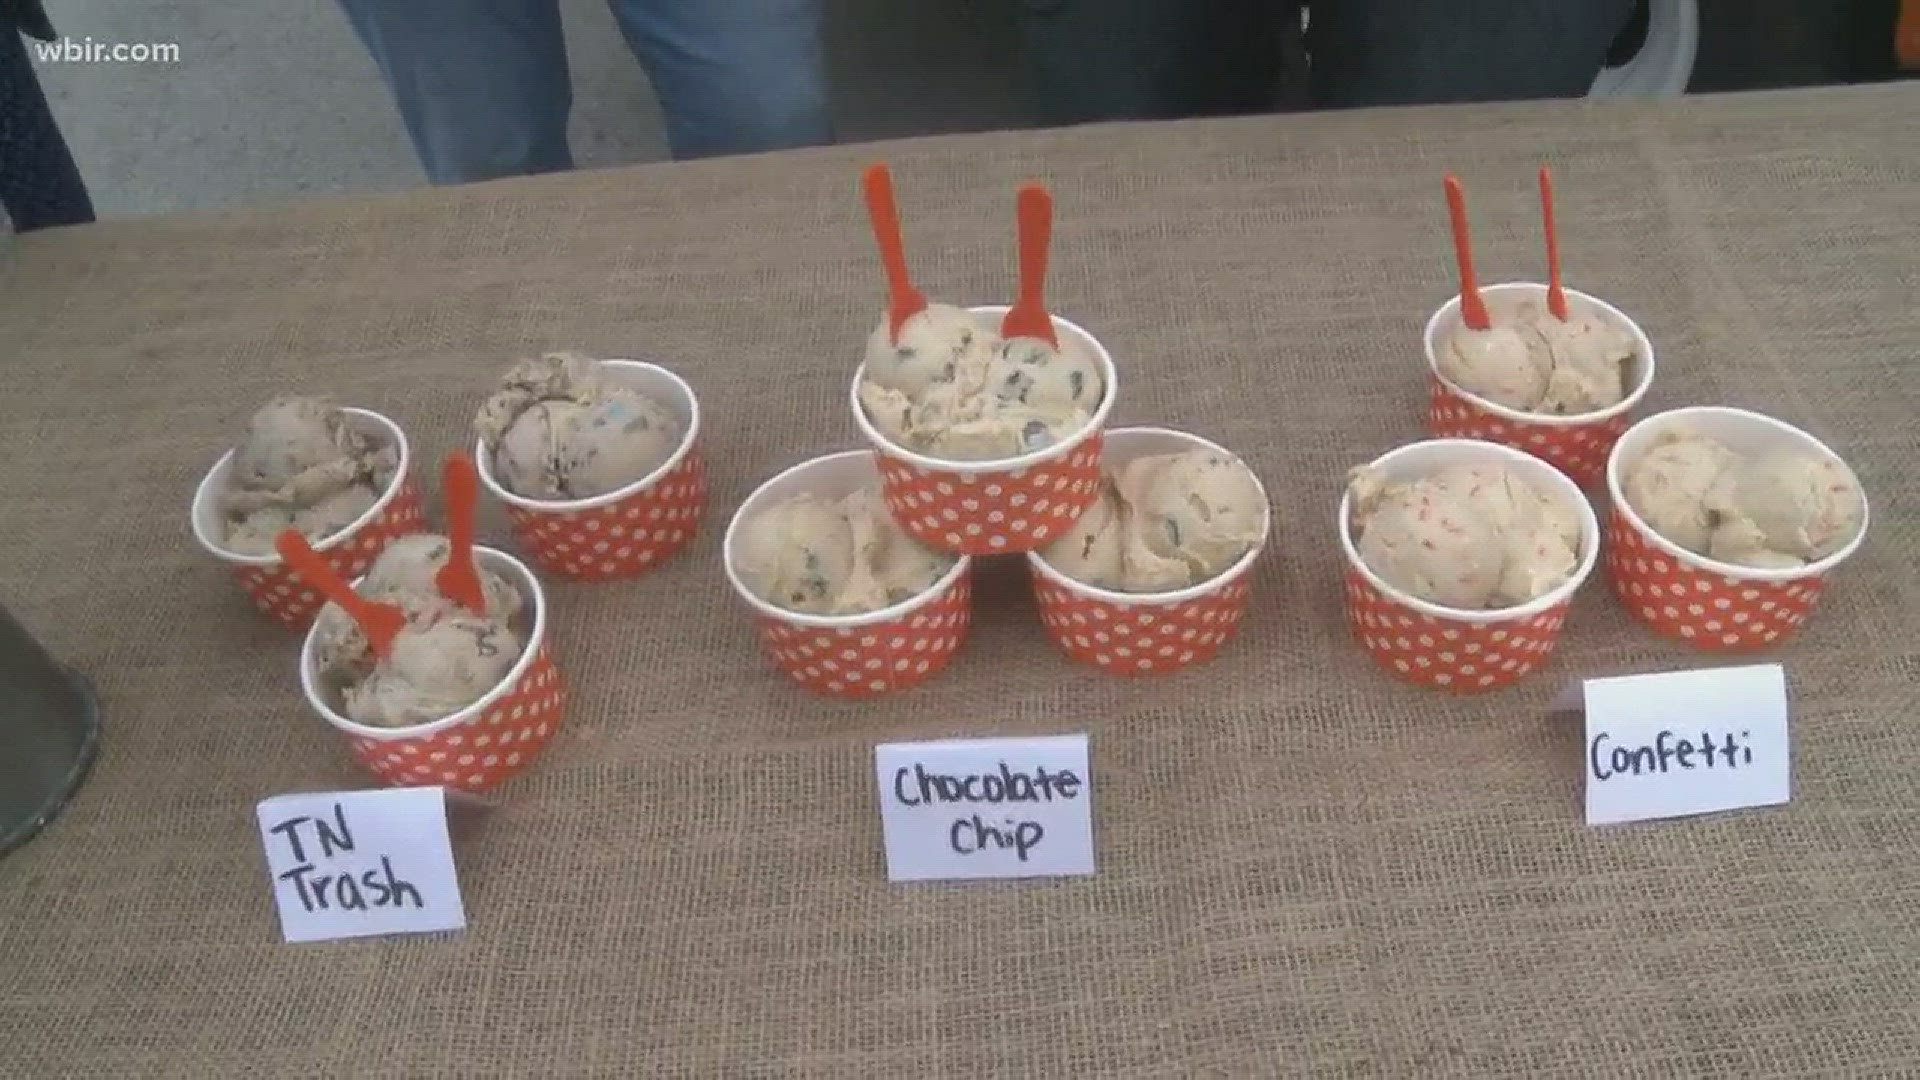 Knox Dough shares how to add a sweet treat to your tailgate: edible cookie dough.